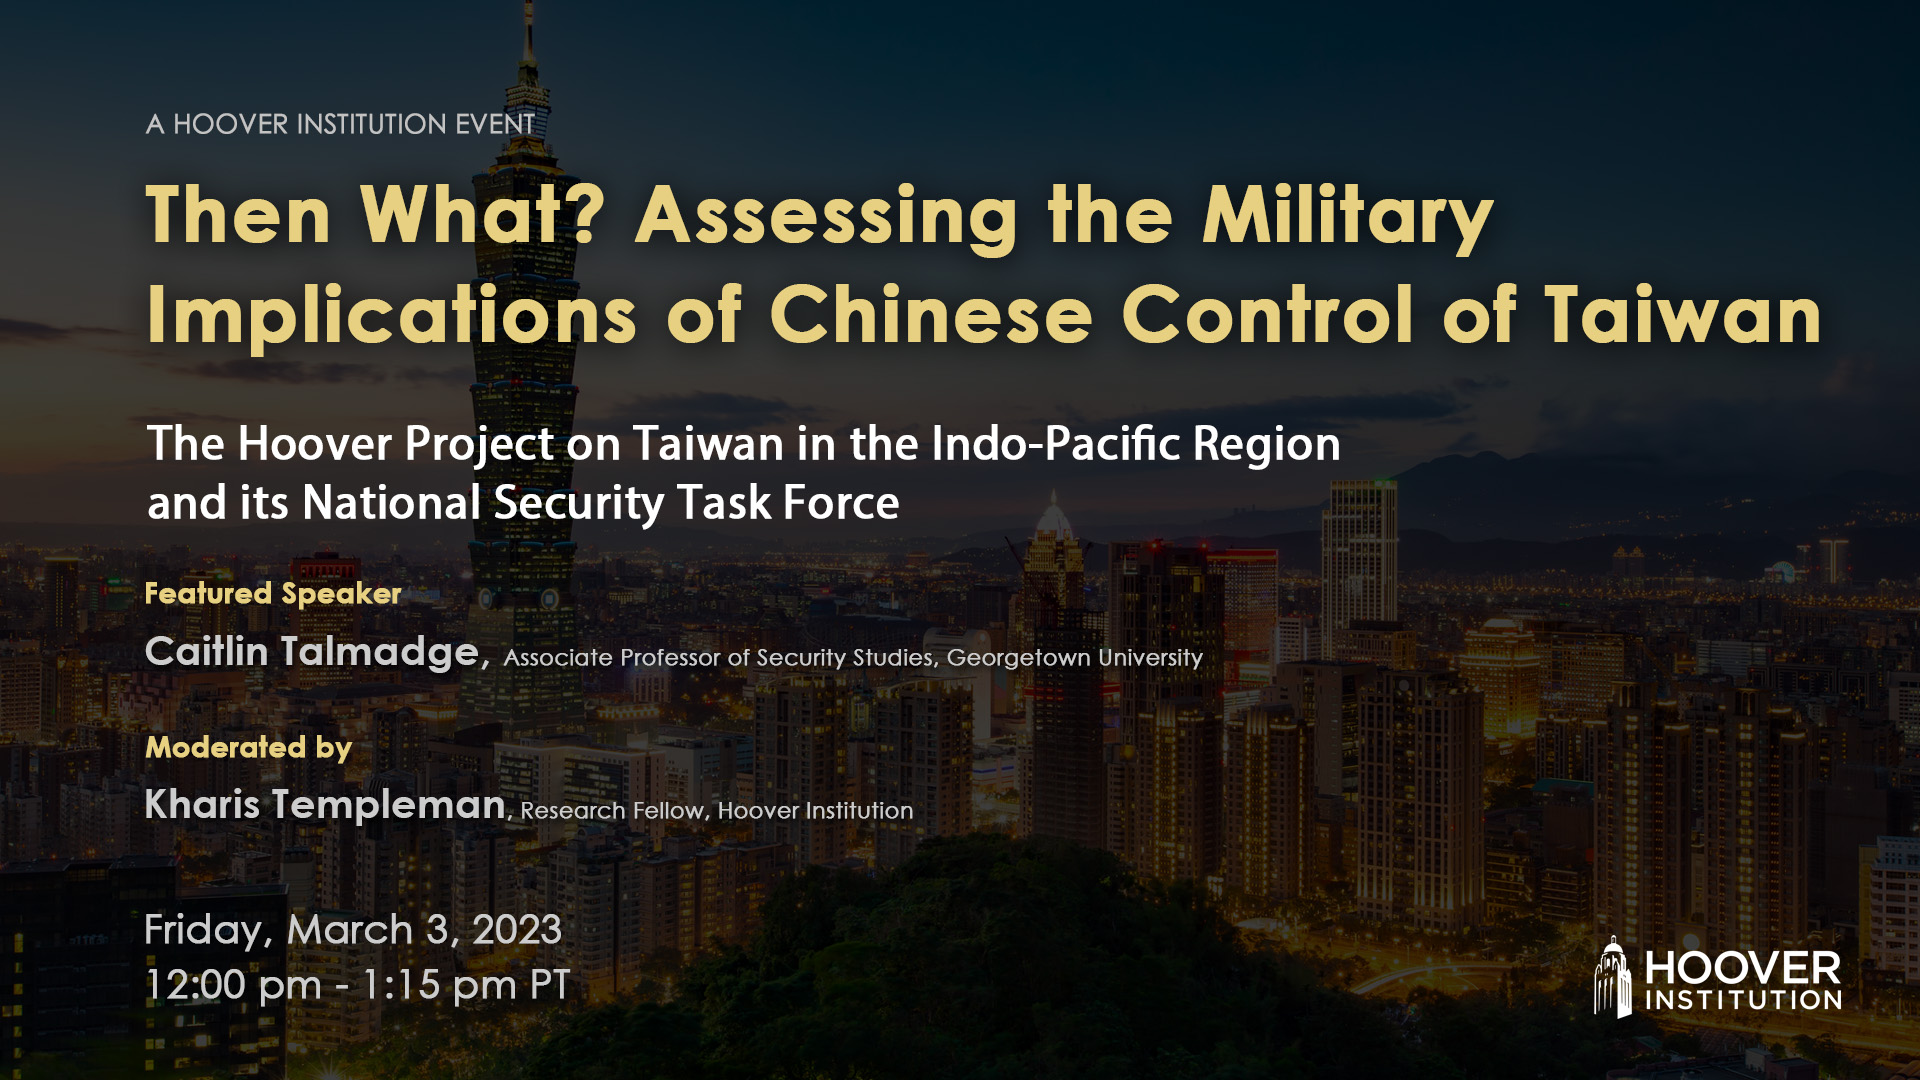 Then What? Assessing the Military Implications of Chinese Control of Taiwan